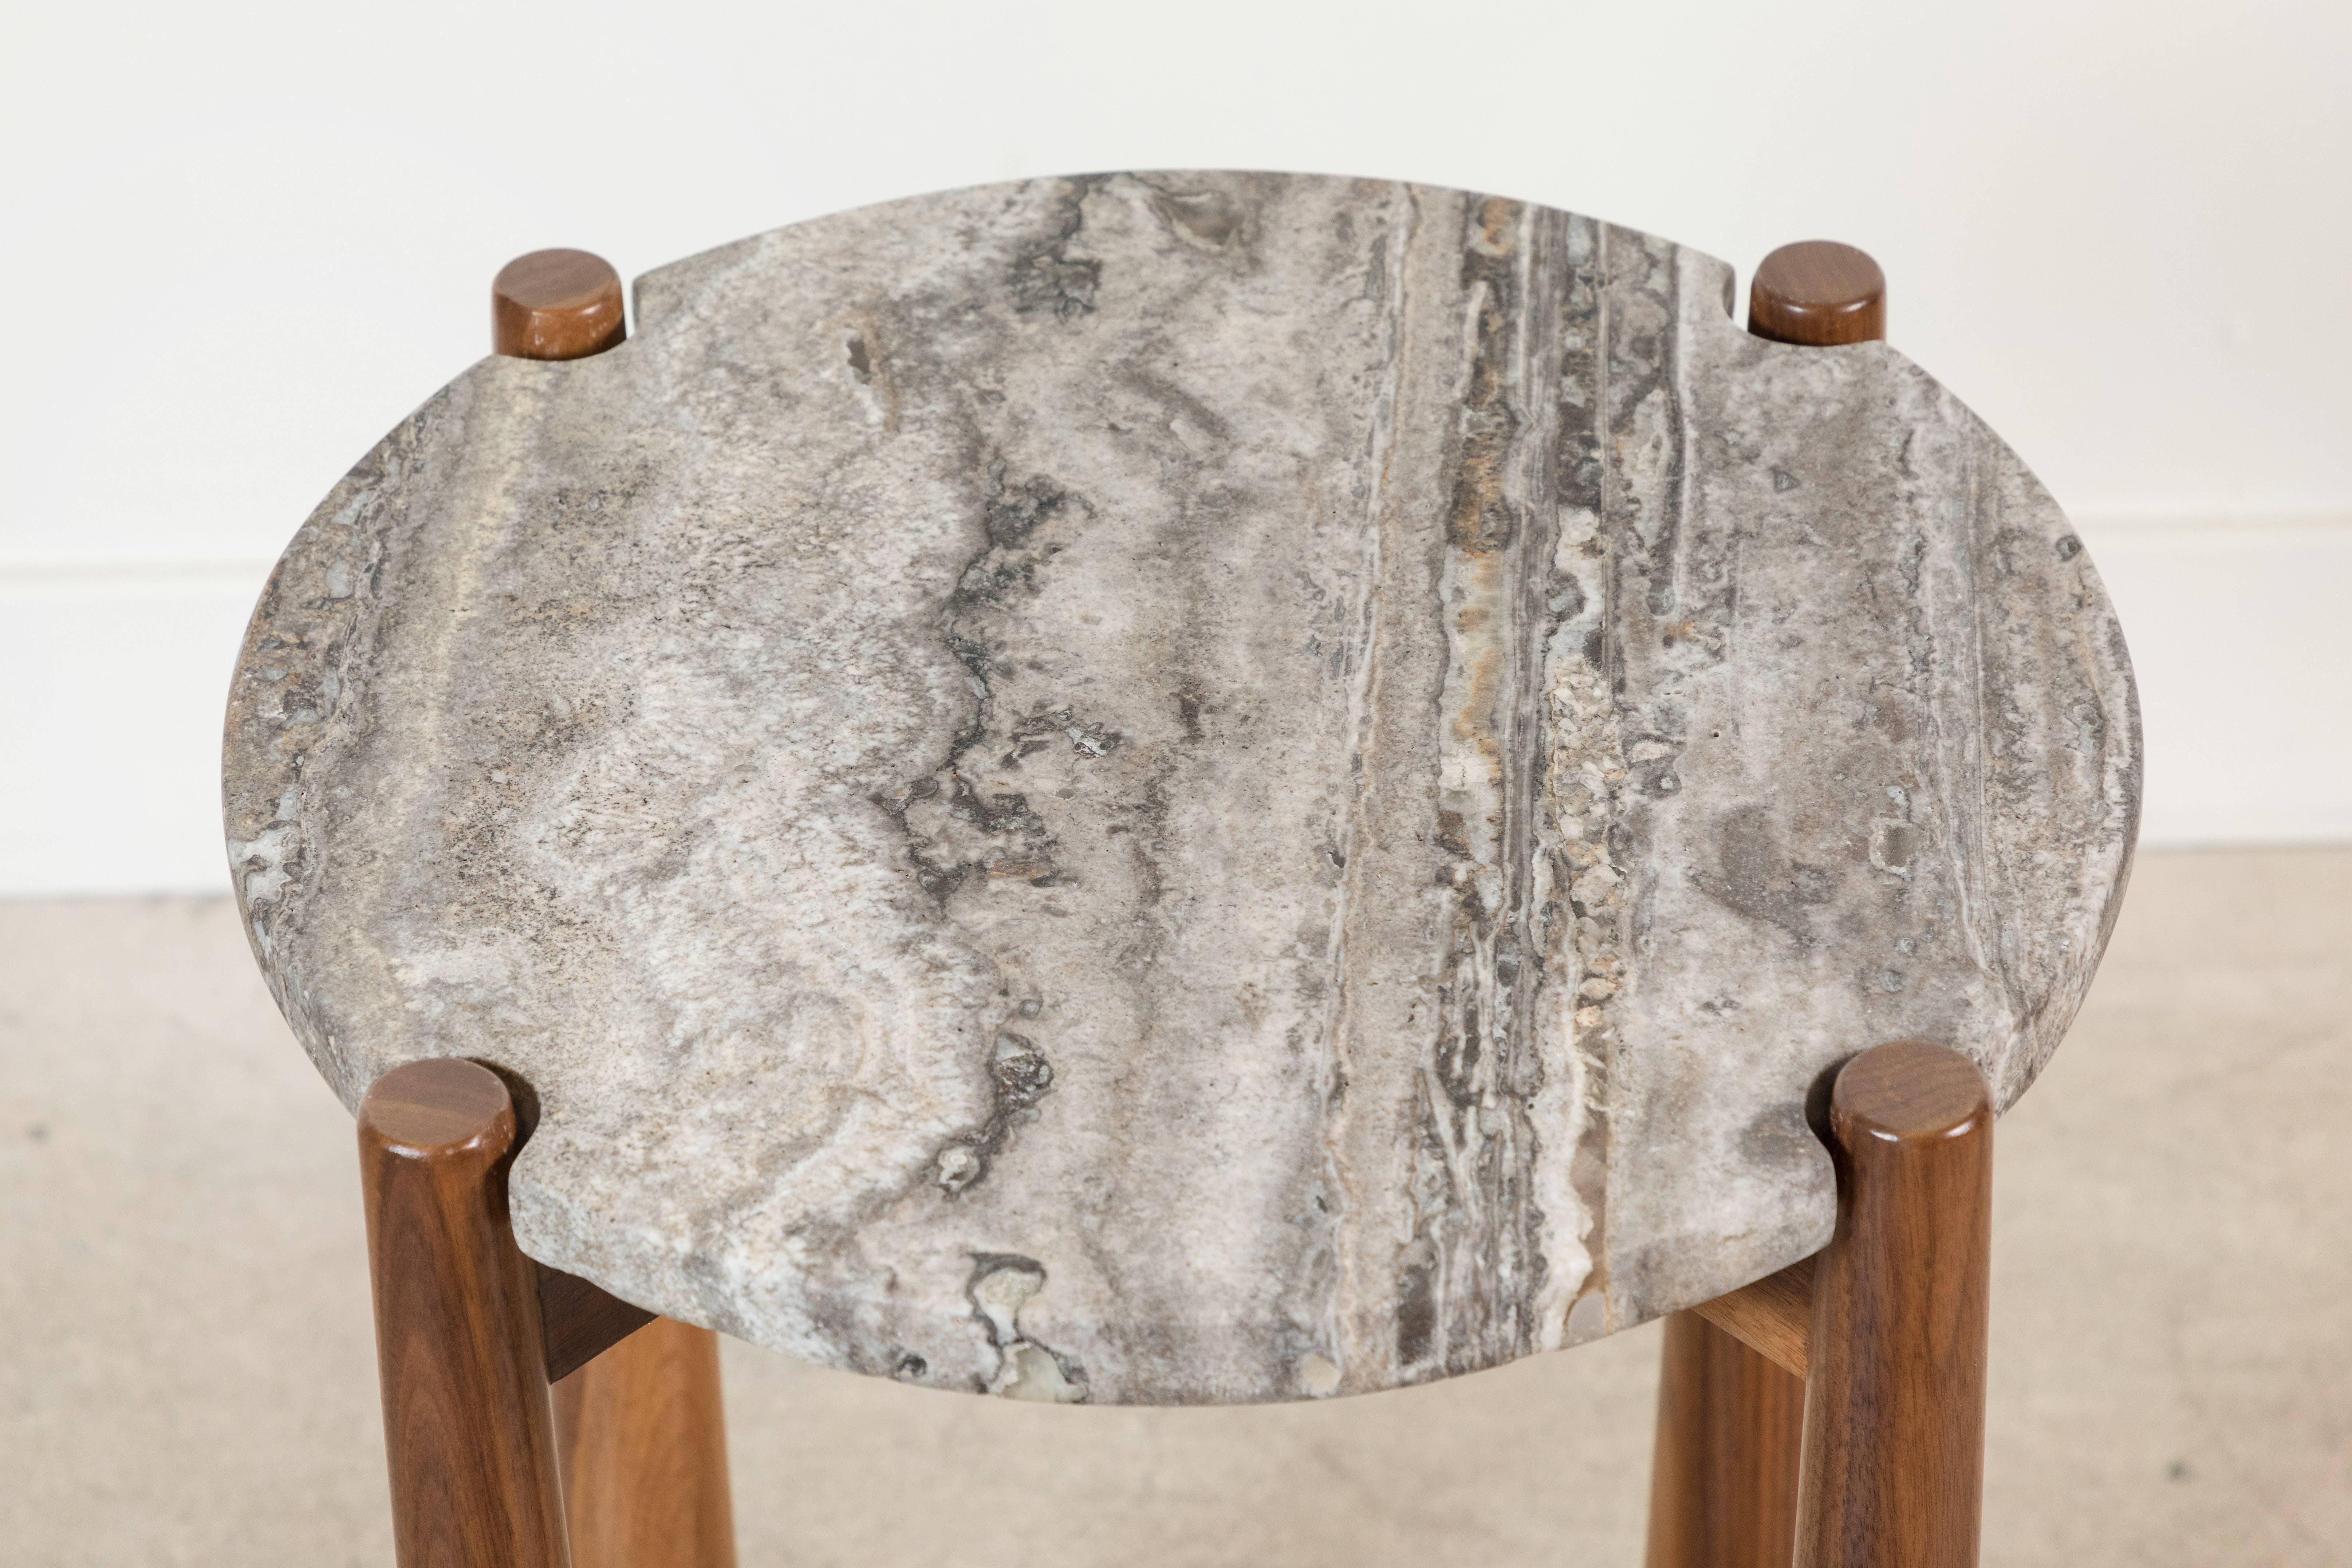 Contemporary Travertine and Walnut Bronson Drinks Table by Lawson-Fenning